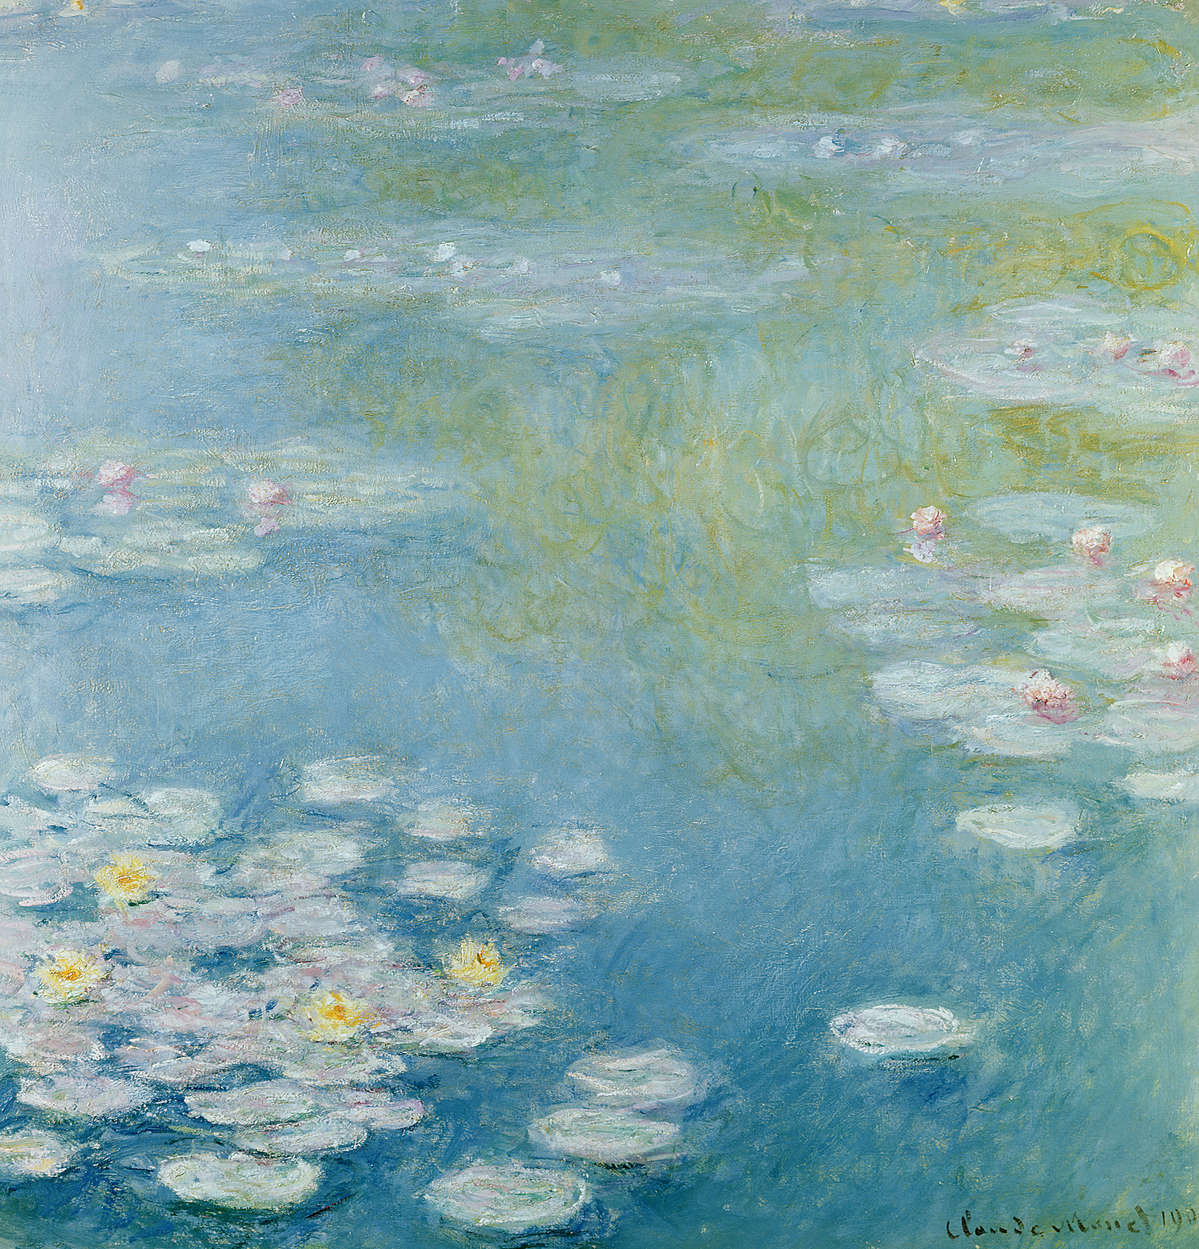             Photo wallpaper "Nymphs in Giverny" by Claude Monet
        